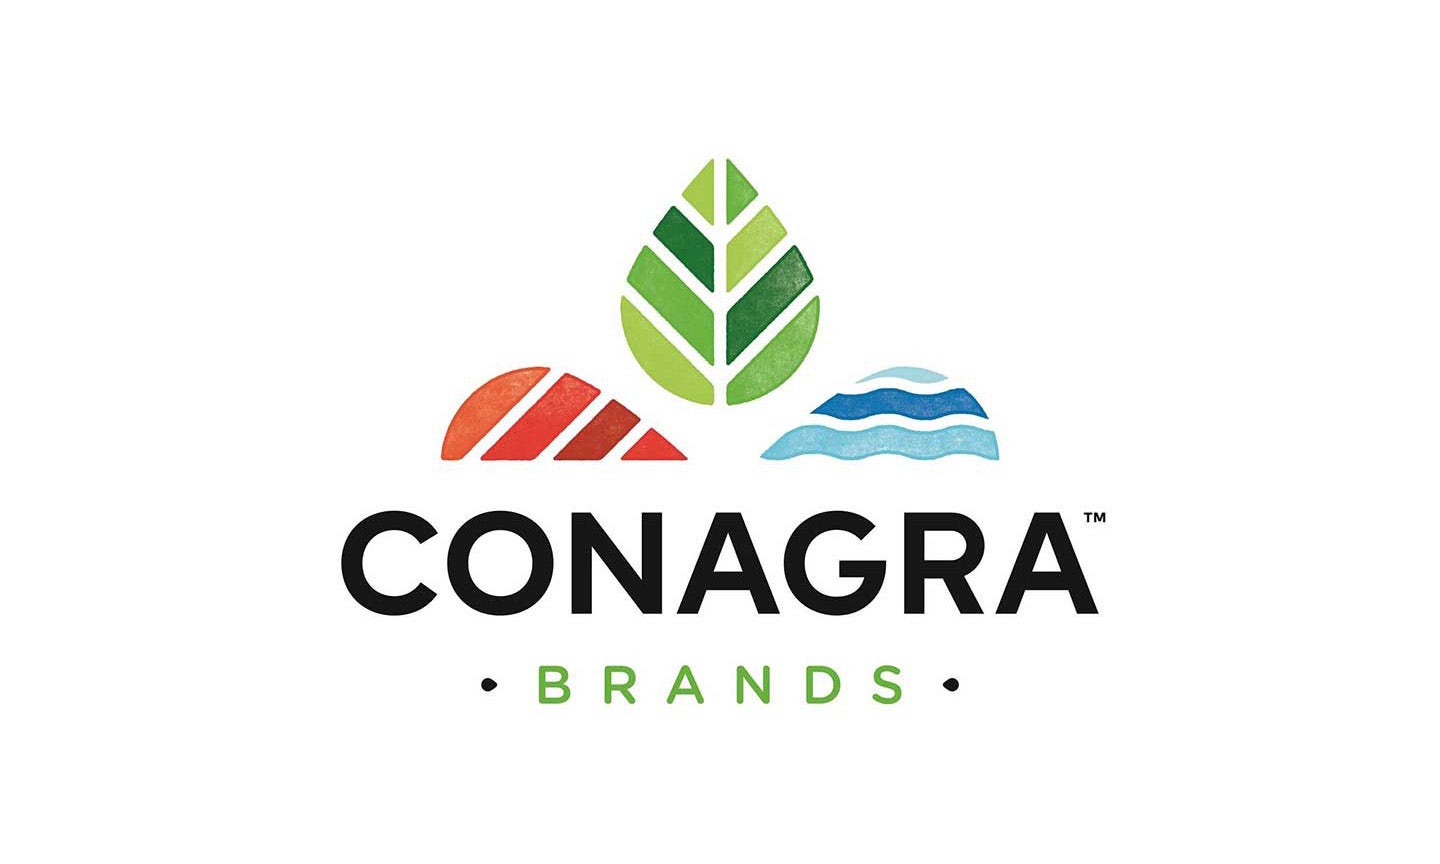 Conagra Brands Is 'Improving': Why This Analyst Turned Bullish Despite Tailwinds